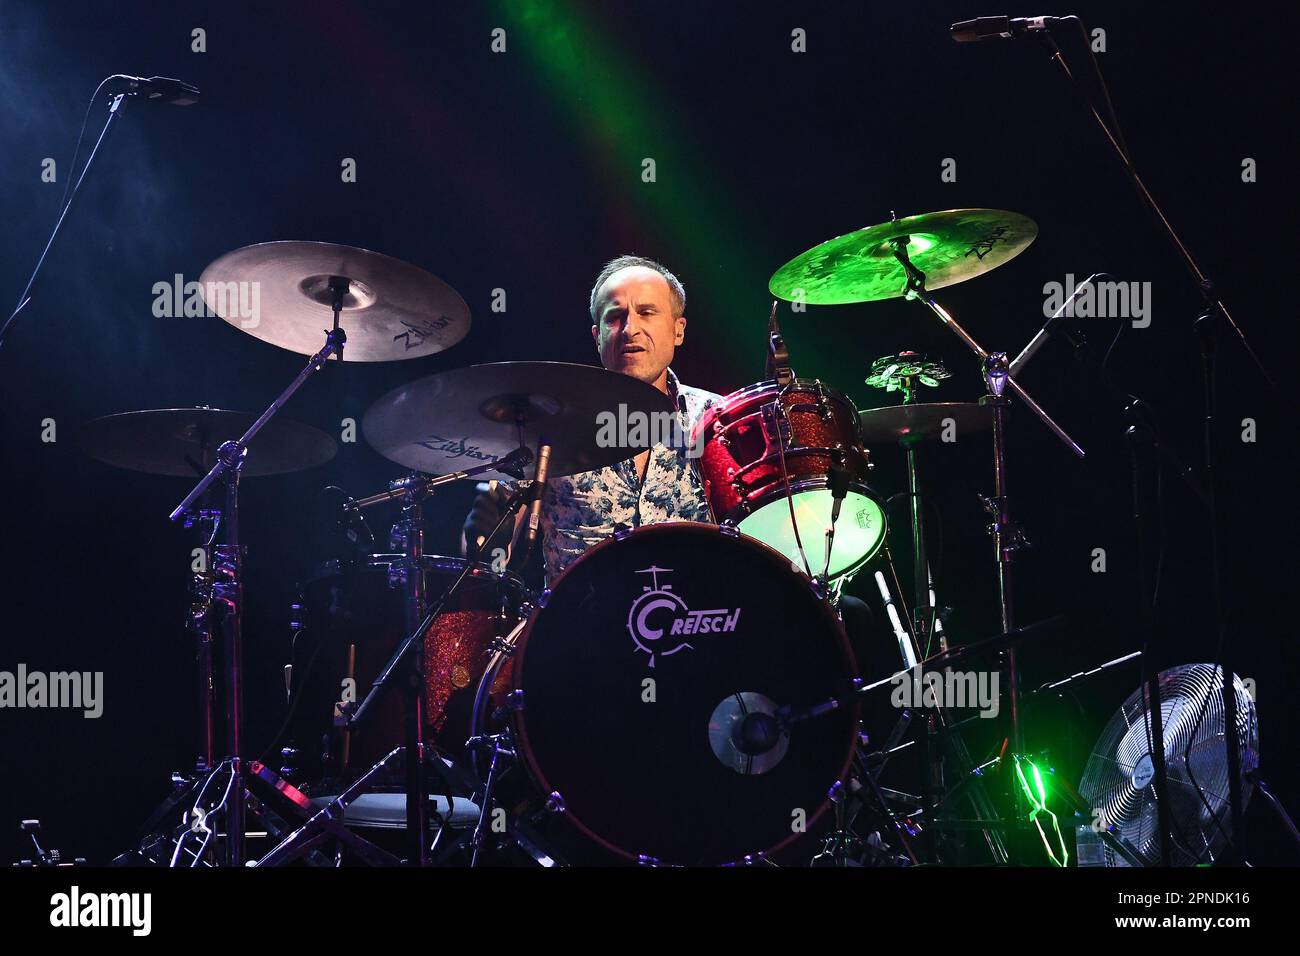 Rio de Janeiro, Brazil, April 14, 2023. Drummer Mark Kingsmill of the Australian alternative rock band Hoodoo Gurus, during a show at Qualistage in th Stock Photo